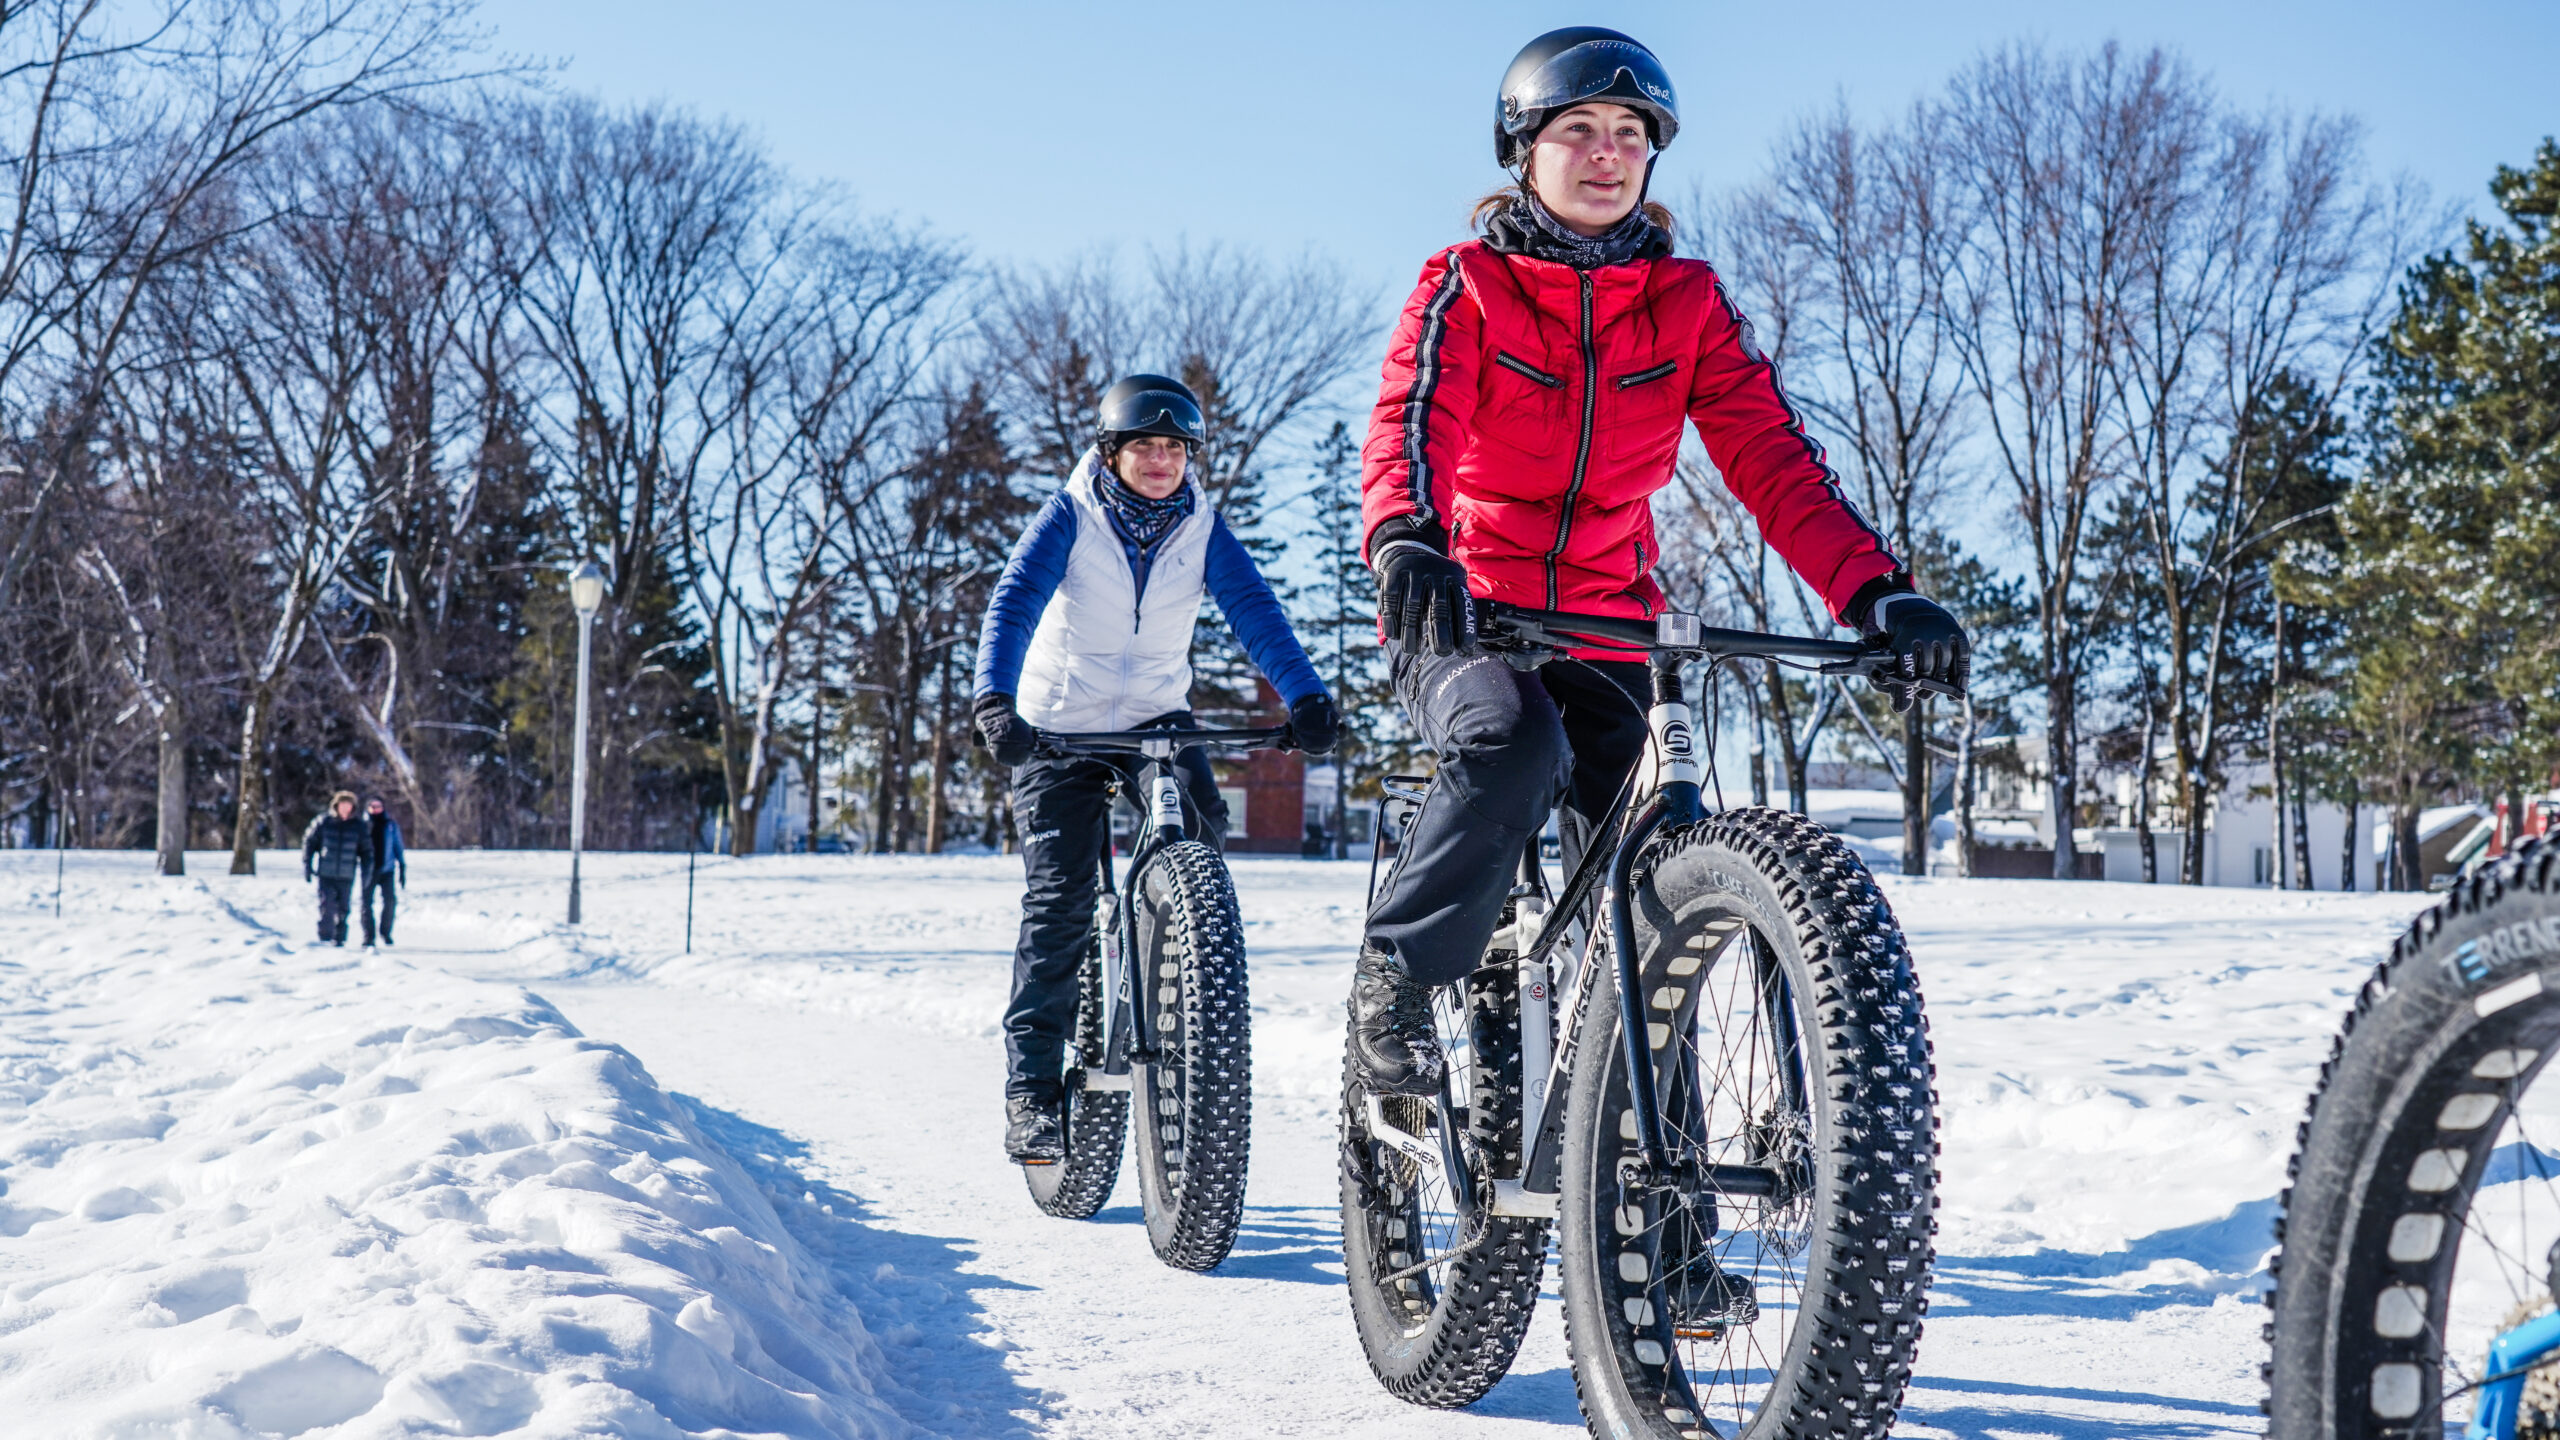 Fat biking activities and Winter Wear Rental in Quebec City - Tuque &  bicycle expériences inc.